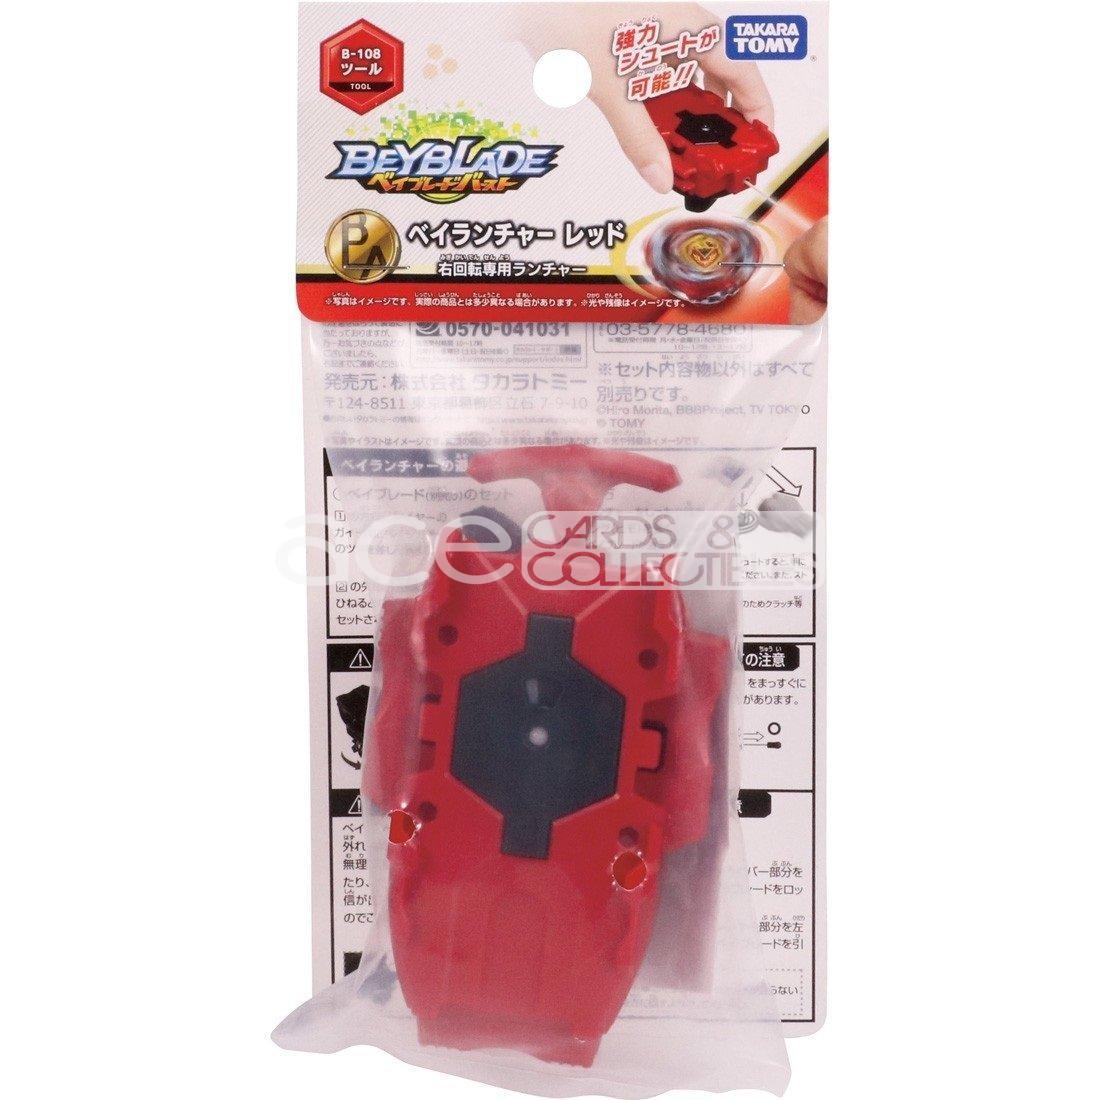 Beyblade Burst B-108 Bey Launcher Red-Takara Tomy-Ace Cards & Collectibles